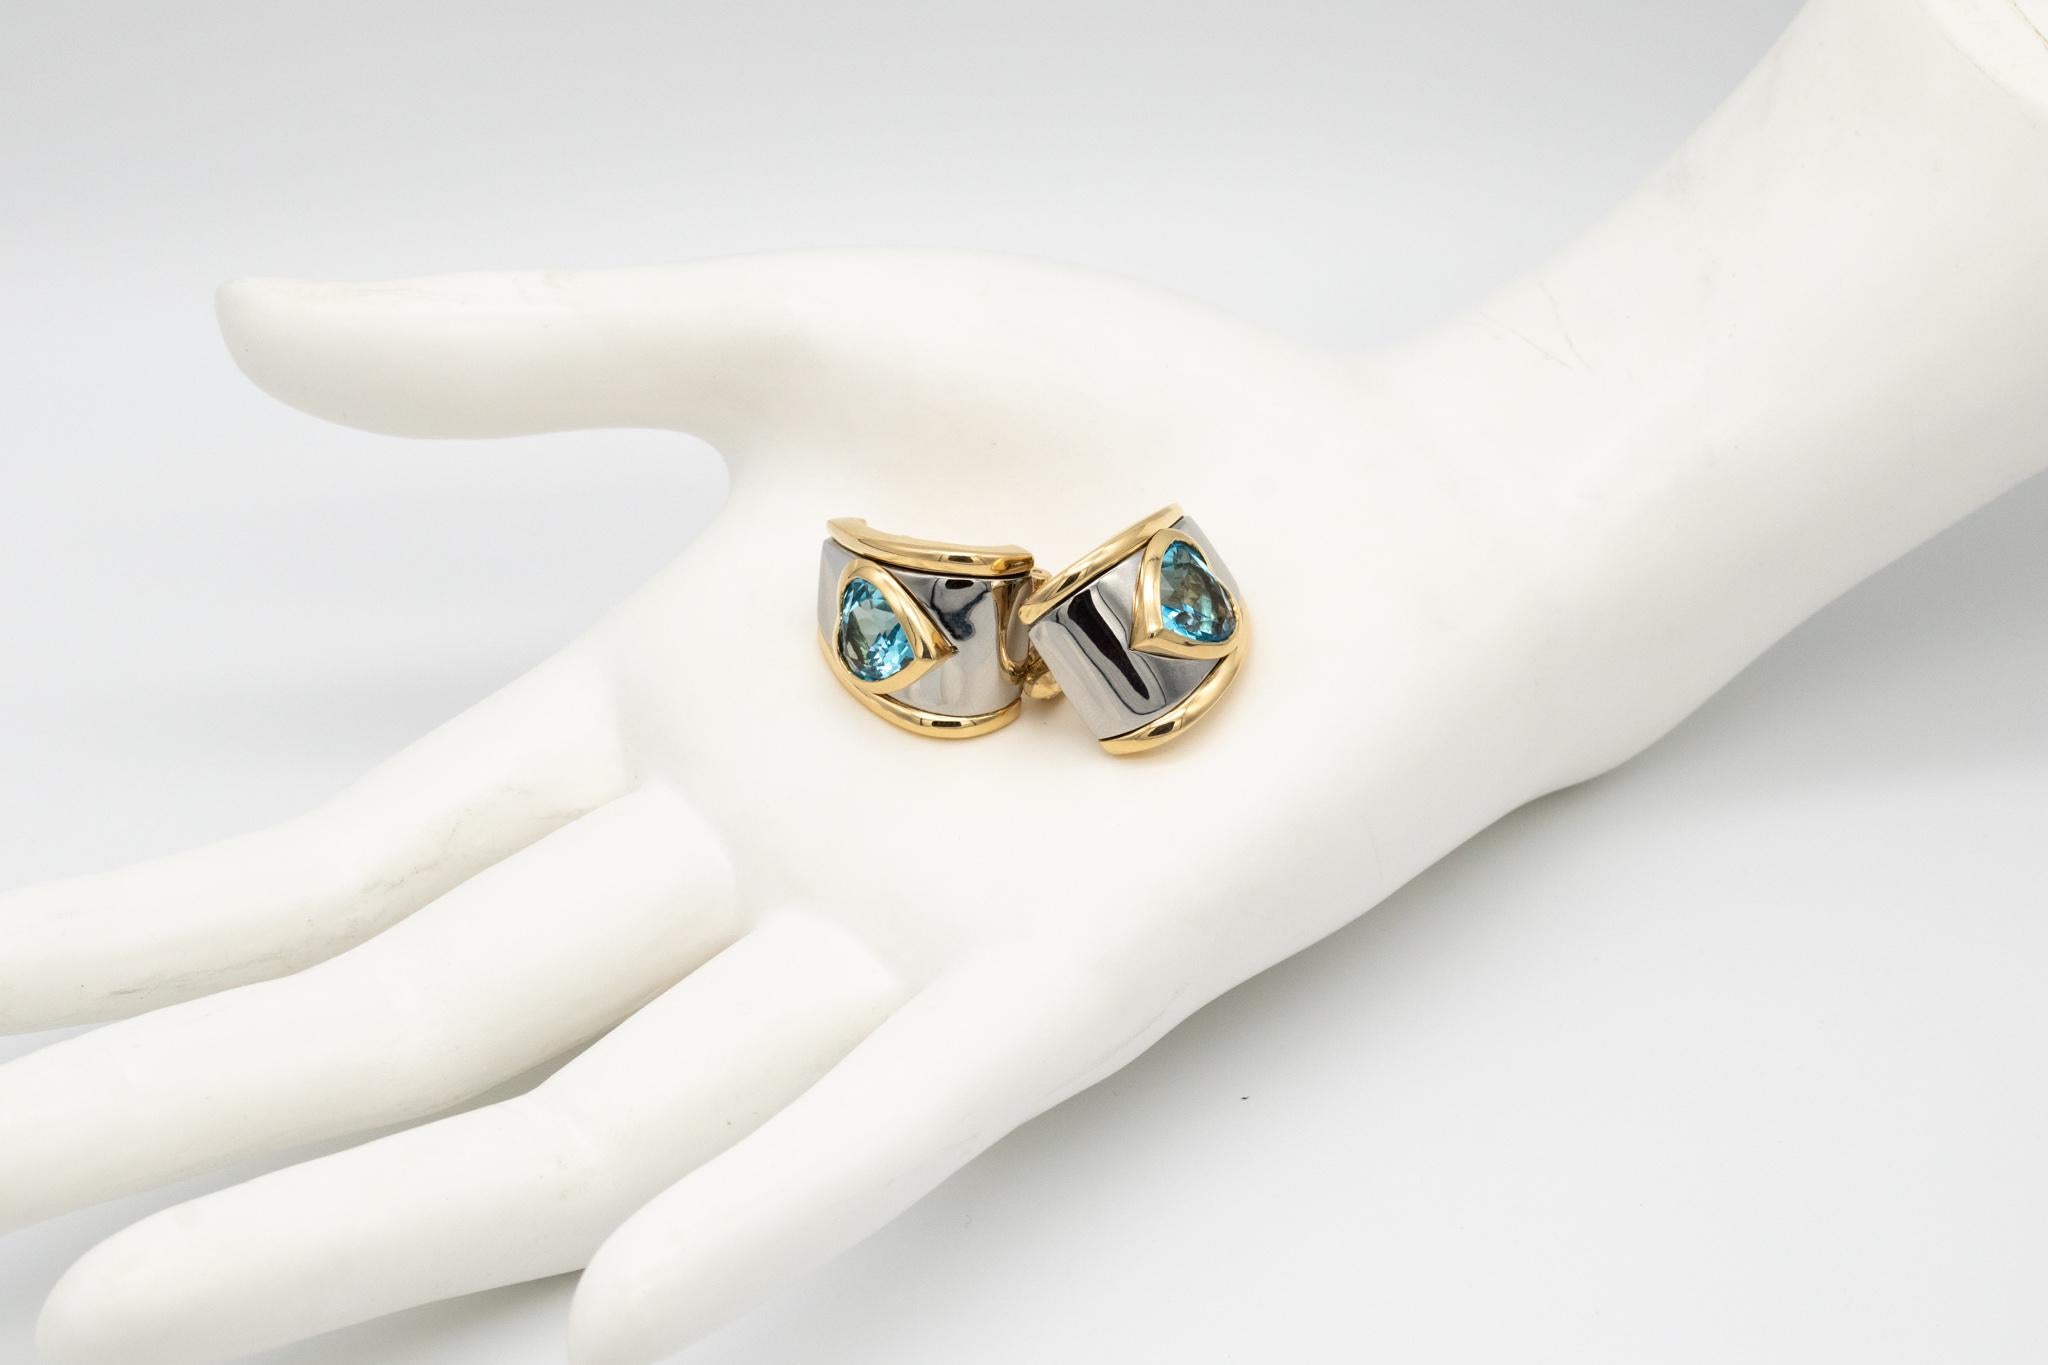 Nice pair of clips-earrings designed by Marina B. (Bvlgari).

Modern pieces made in Milan Italy by the jewelry house of Marina Bvlgari, at the end of the 20th century. These pair of earrings has been crafted in solid yellow gold of 18 karats and